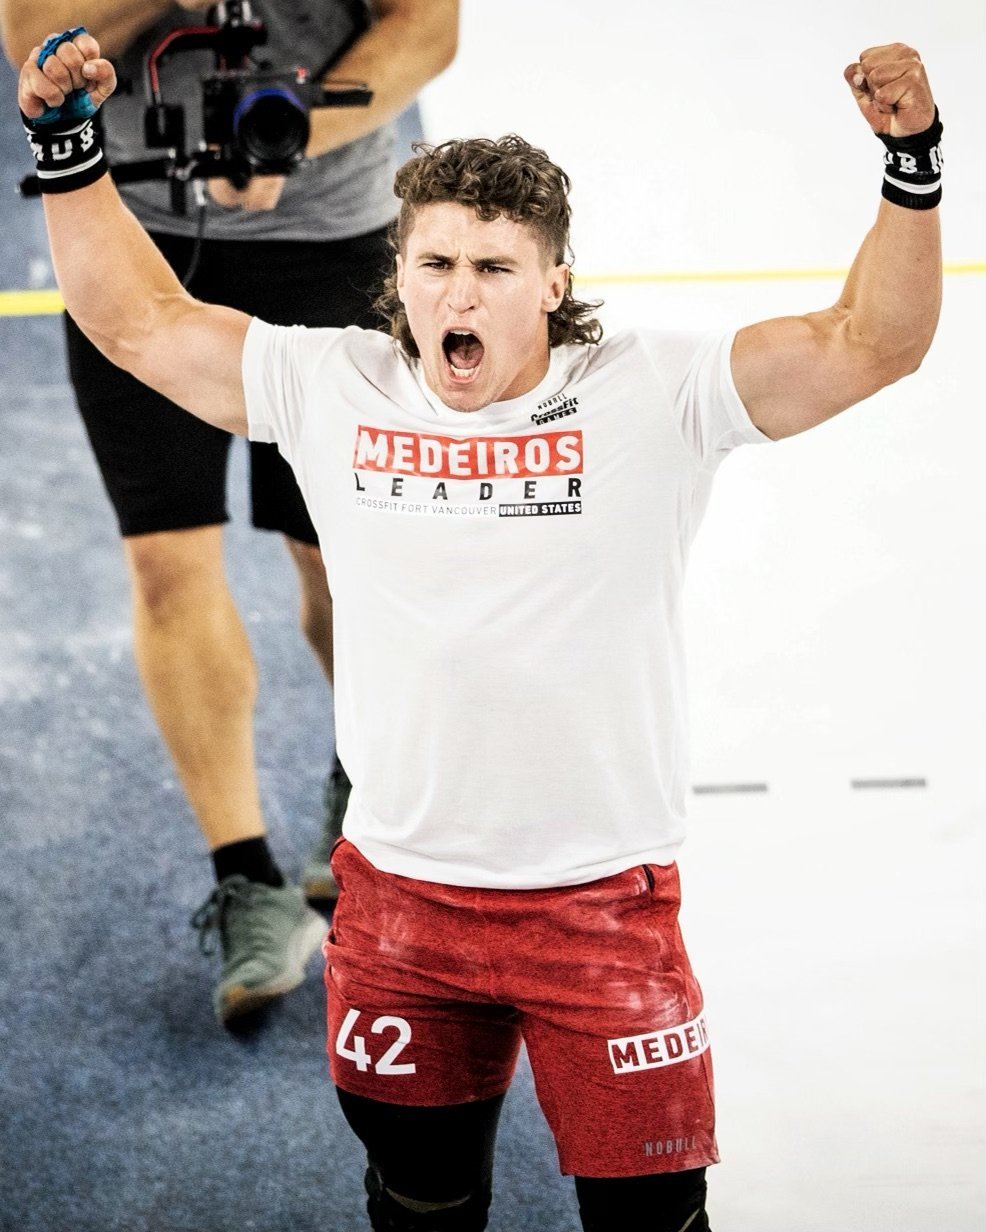 Justin Medeiros is the CrossFit Games defending champion. Photo: CrossFit Games